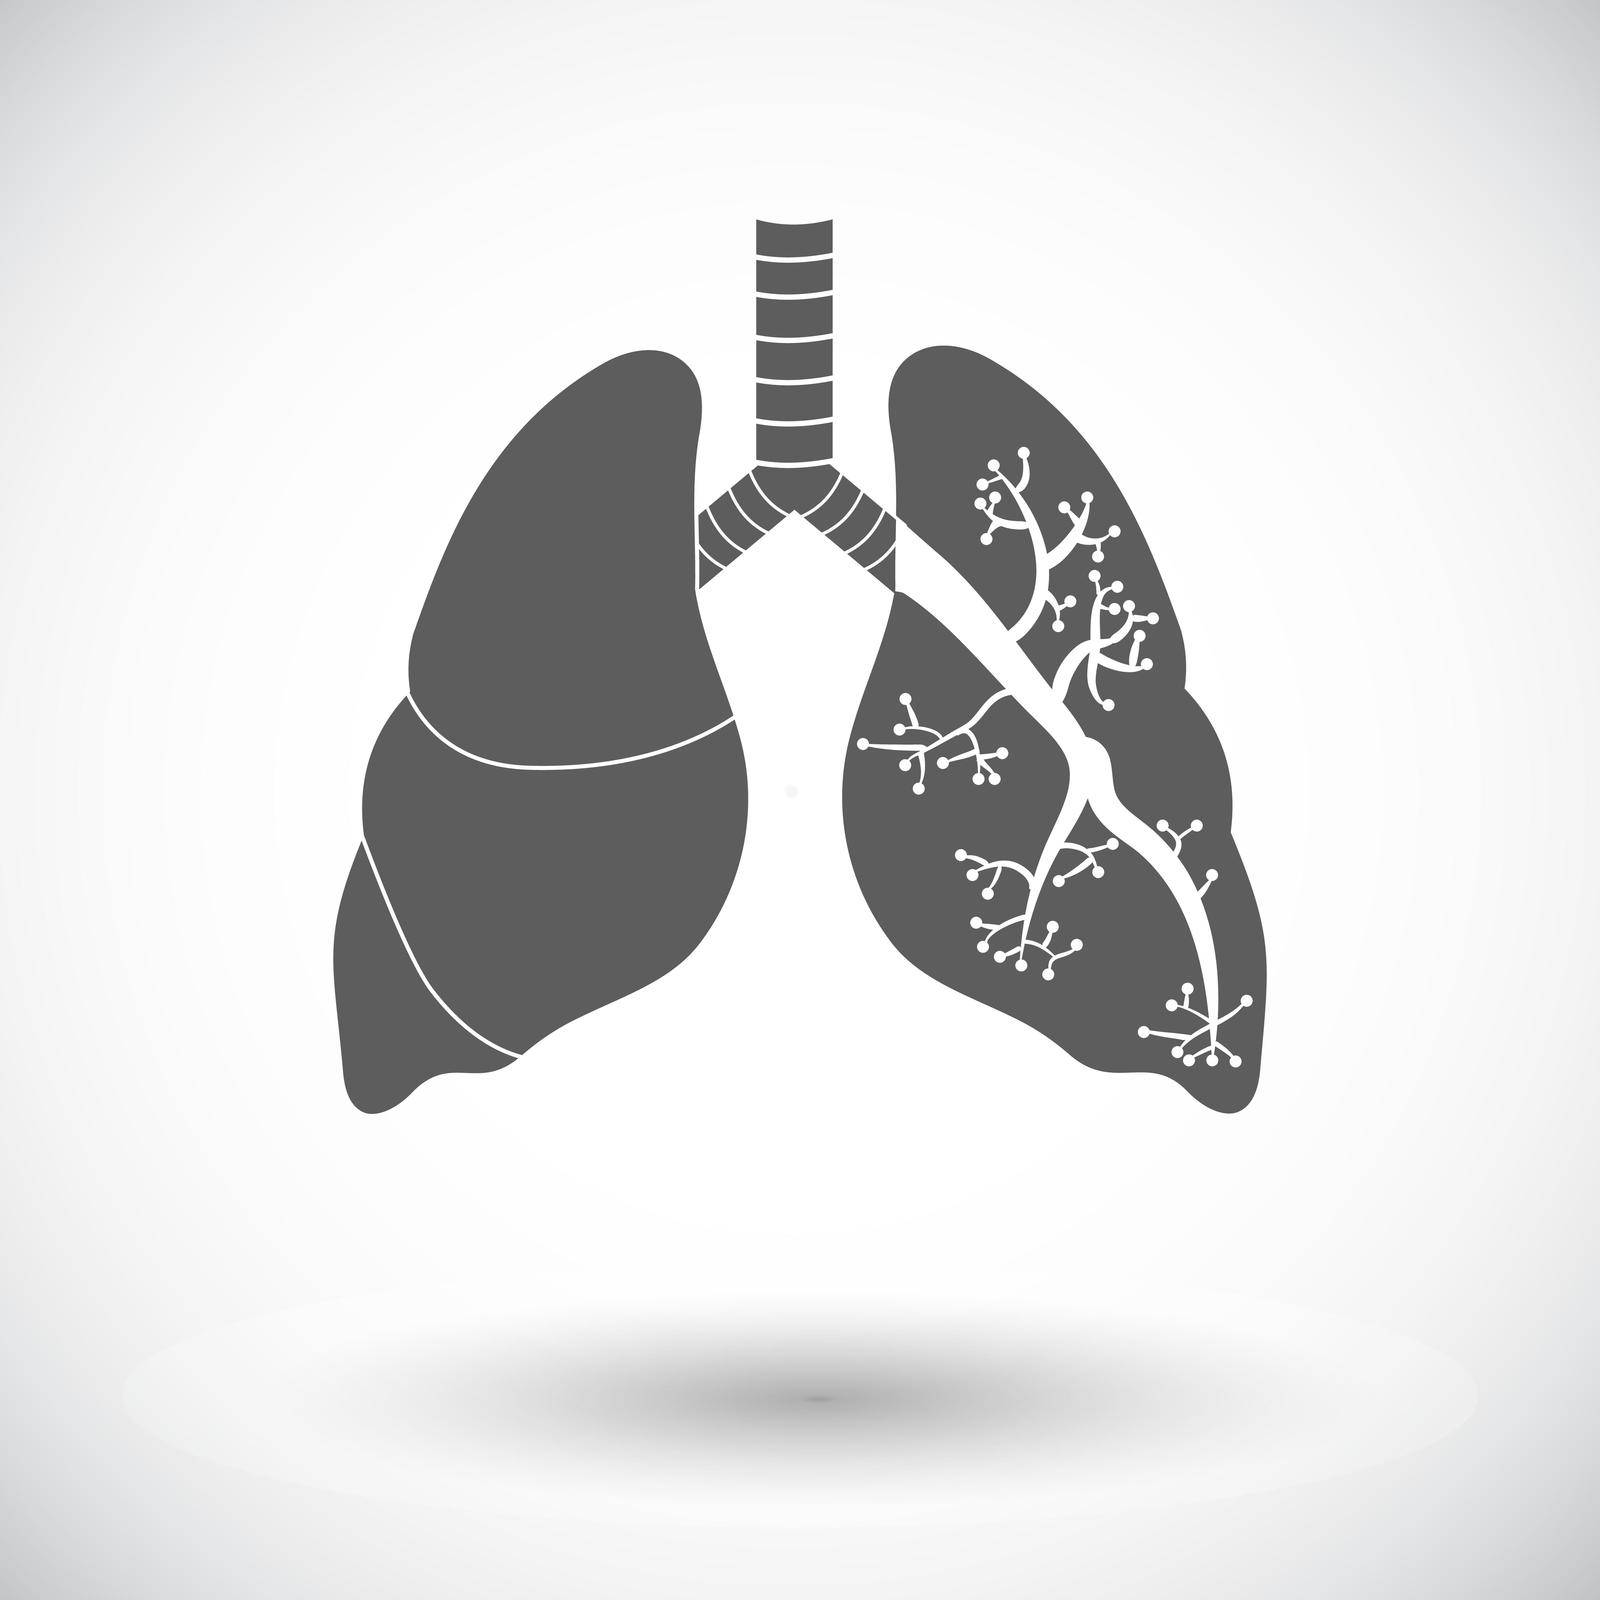 Lungs. Single flat icon on white background. Vector illustration.